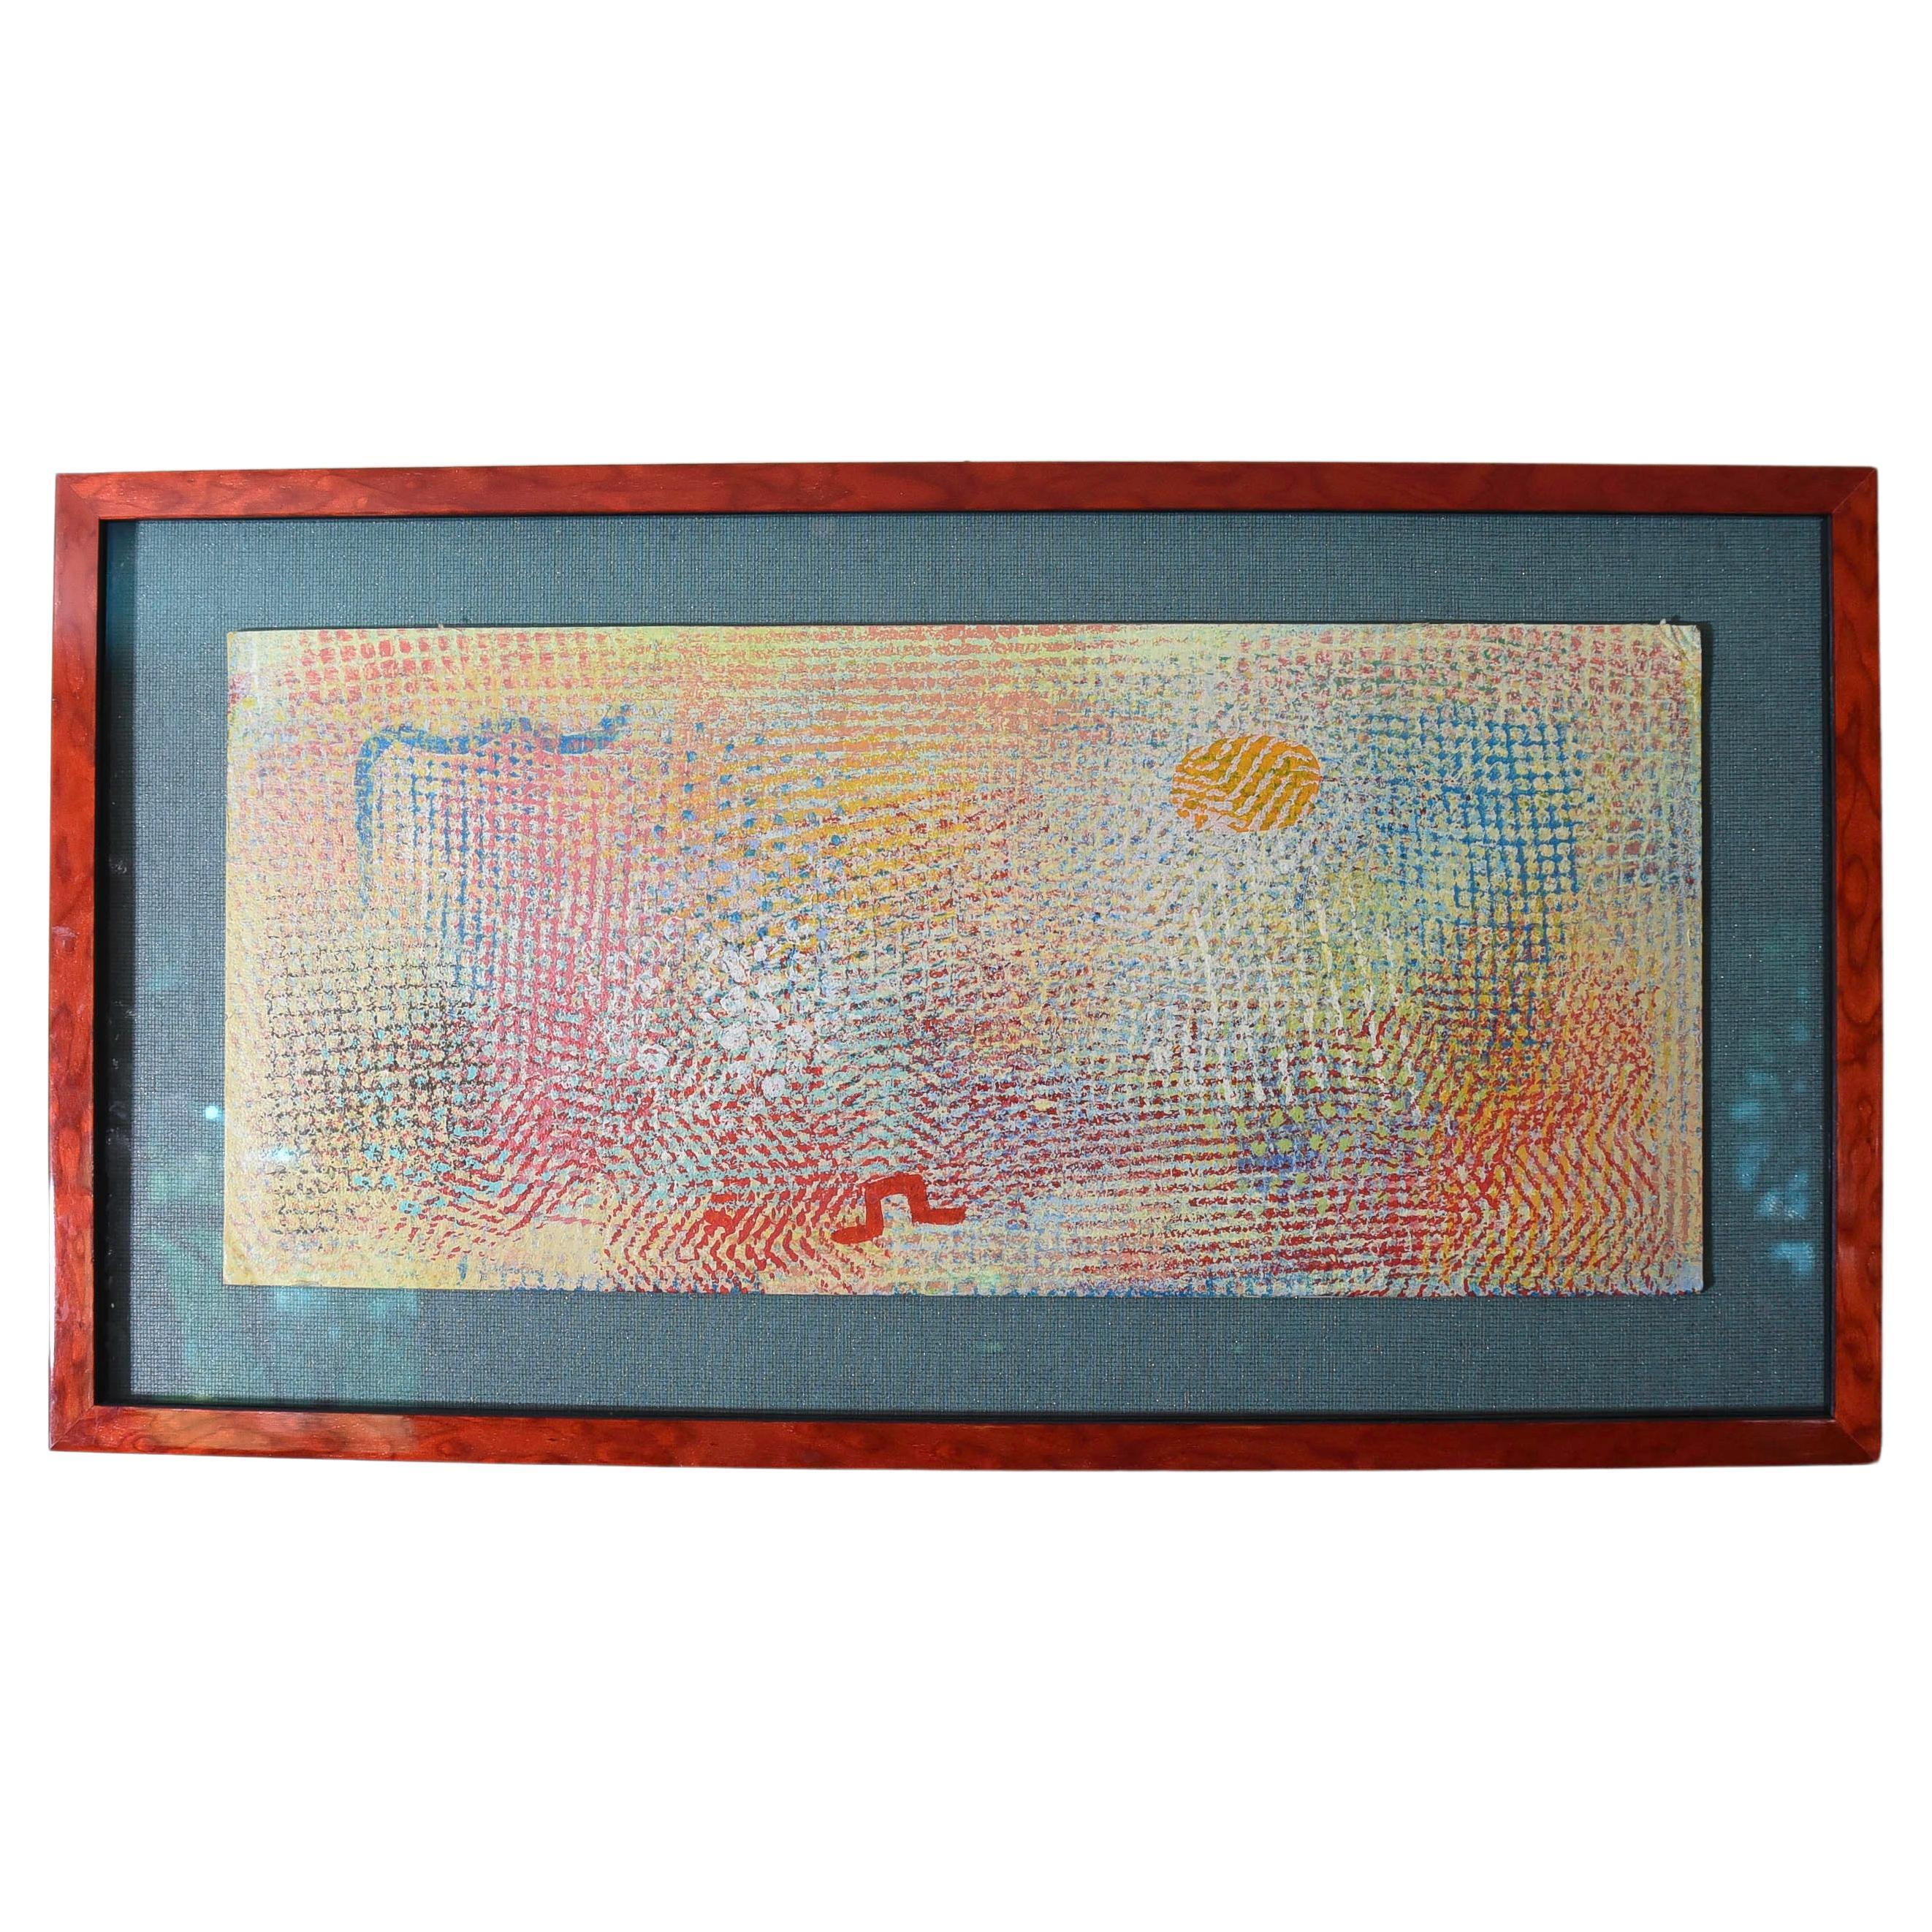 Robert Natkin - Small/Near Miniature 1970s Abstract Impressionist Painting- 9661 For Sale